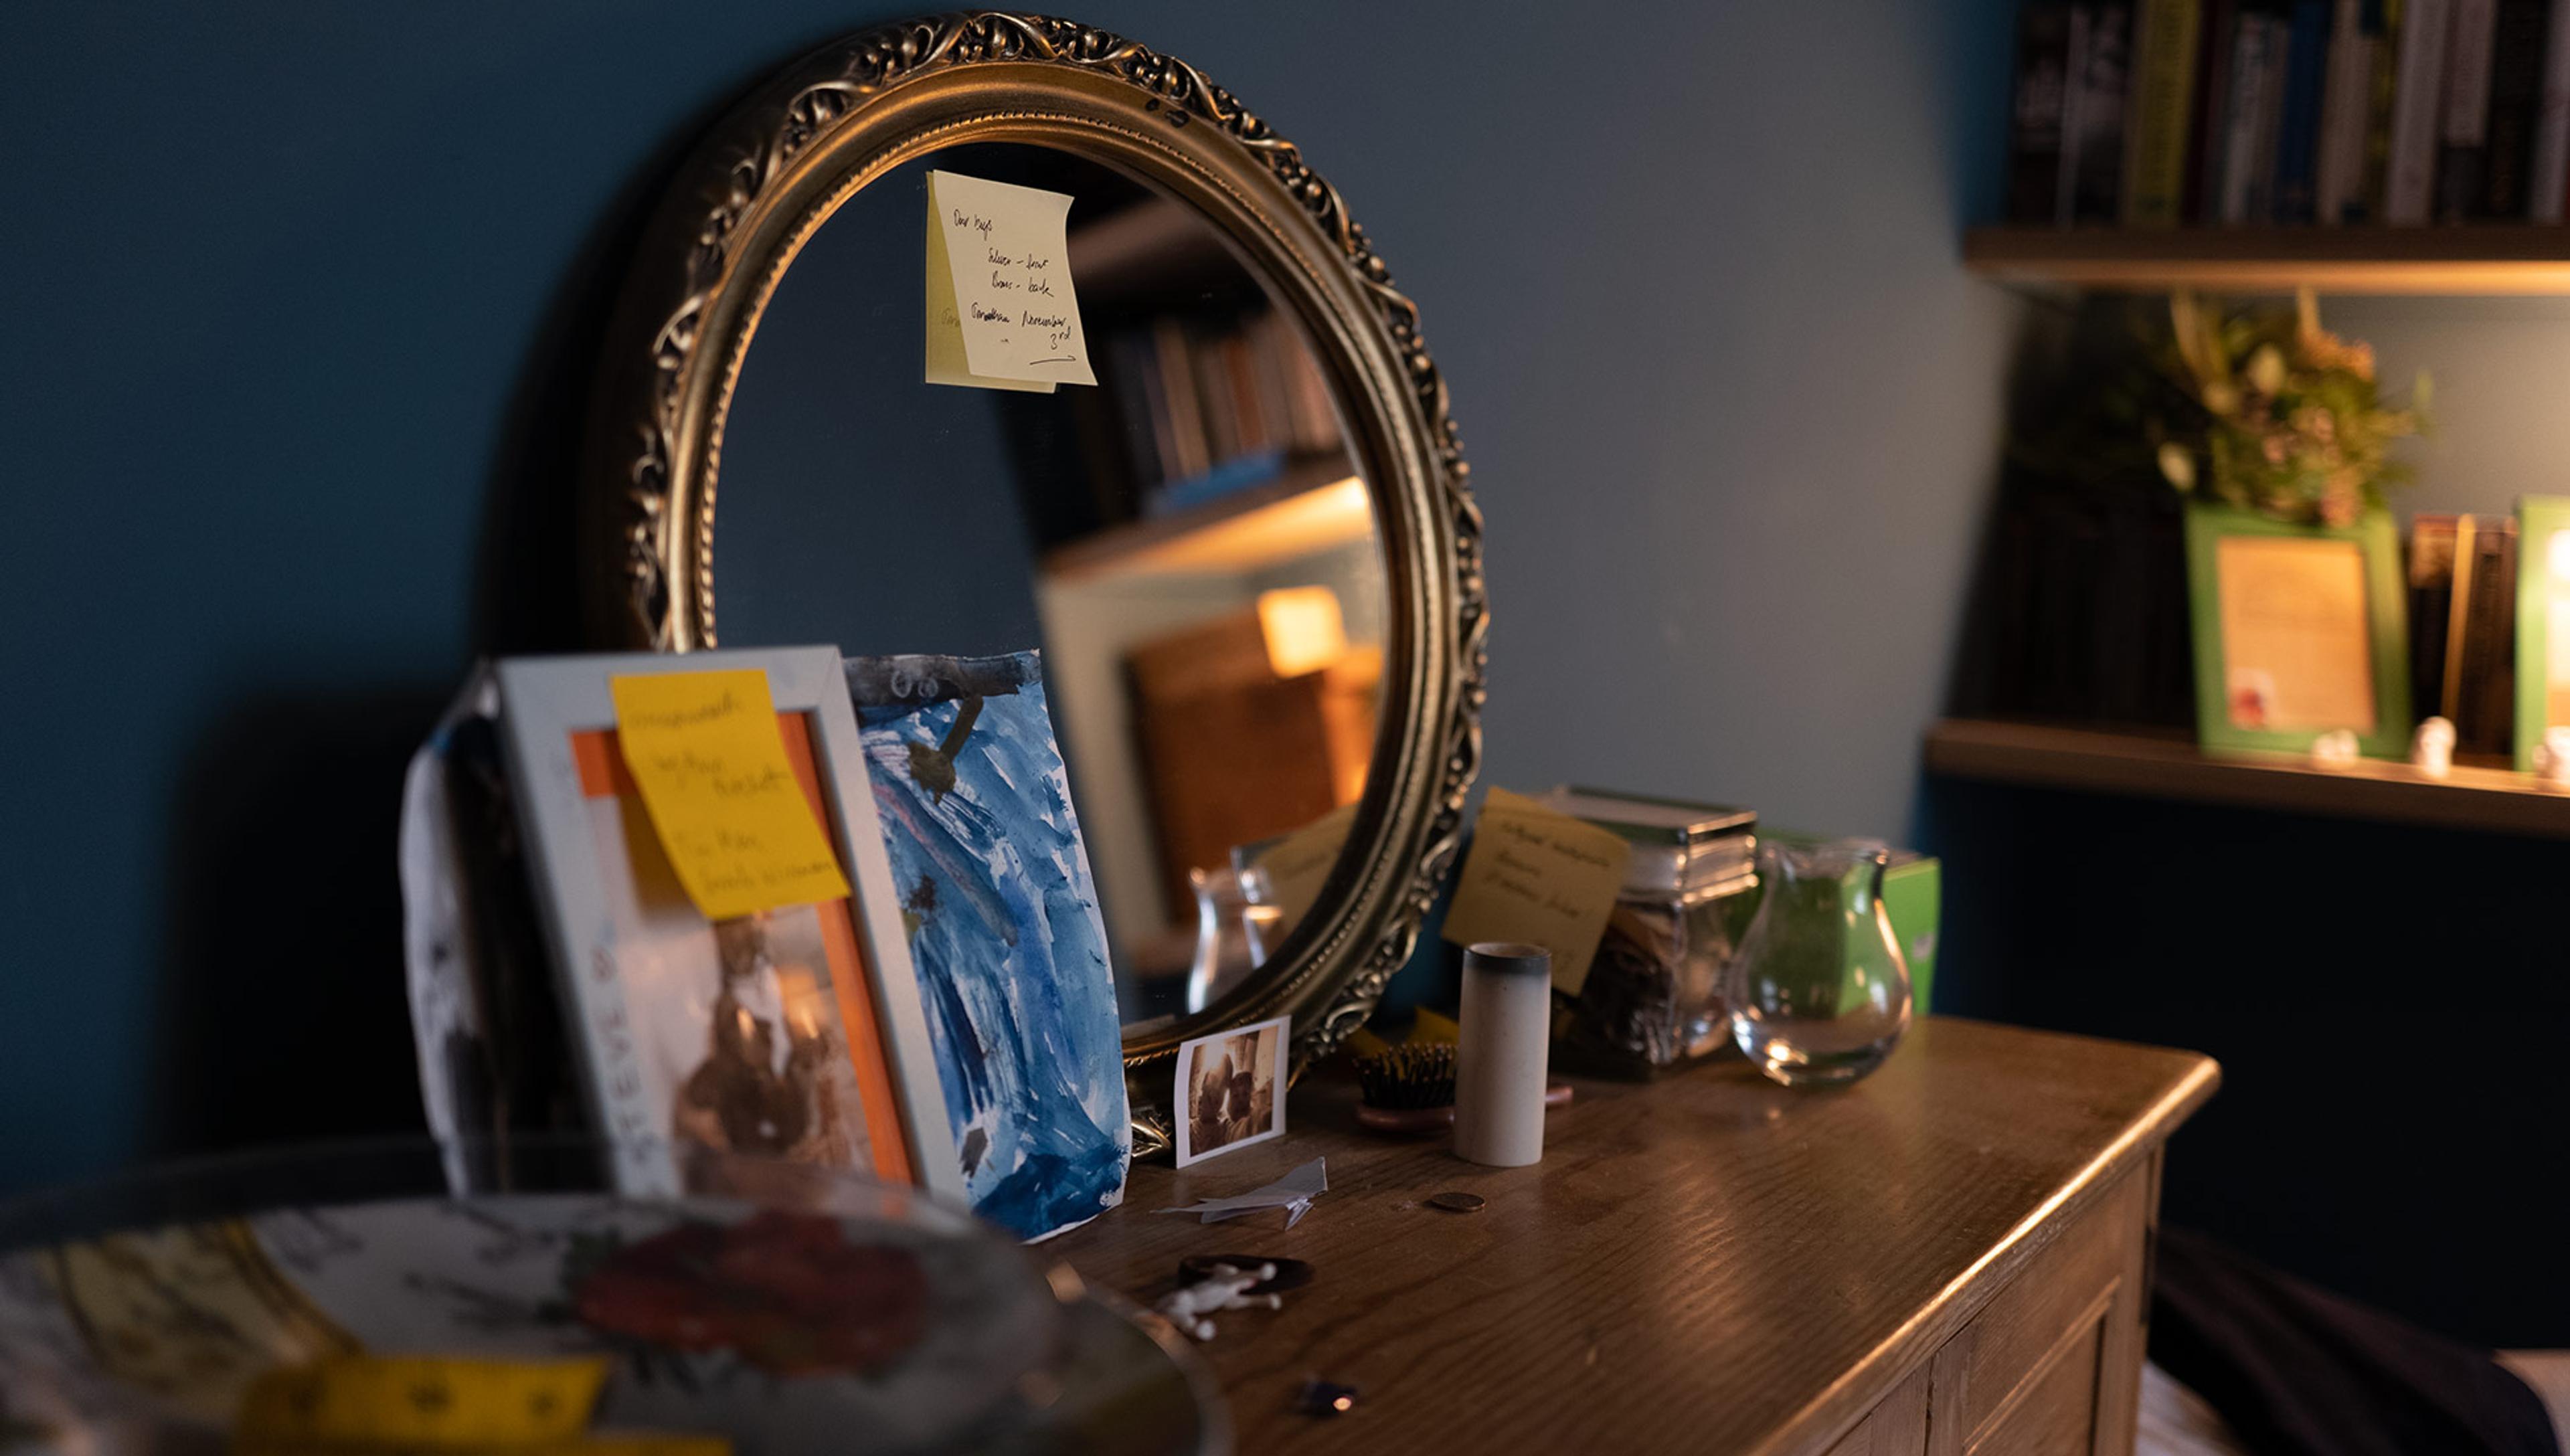 Sticky reminder notes are seen on a mirror and on various other items on top of a chest of drawers